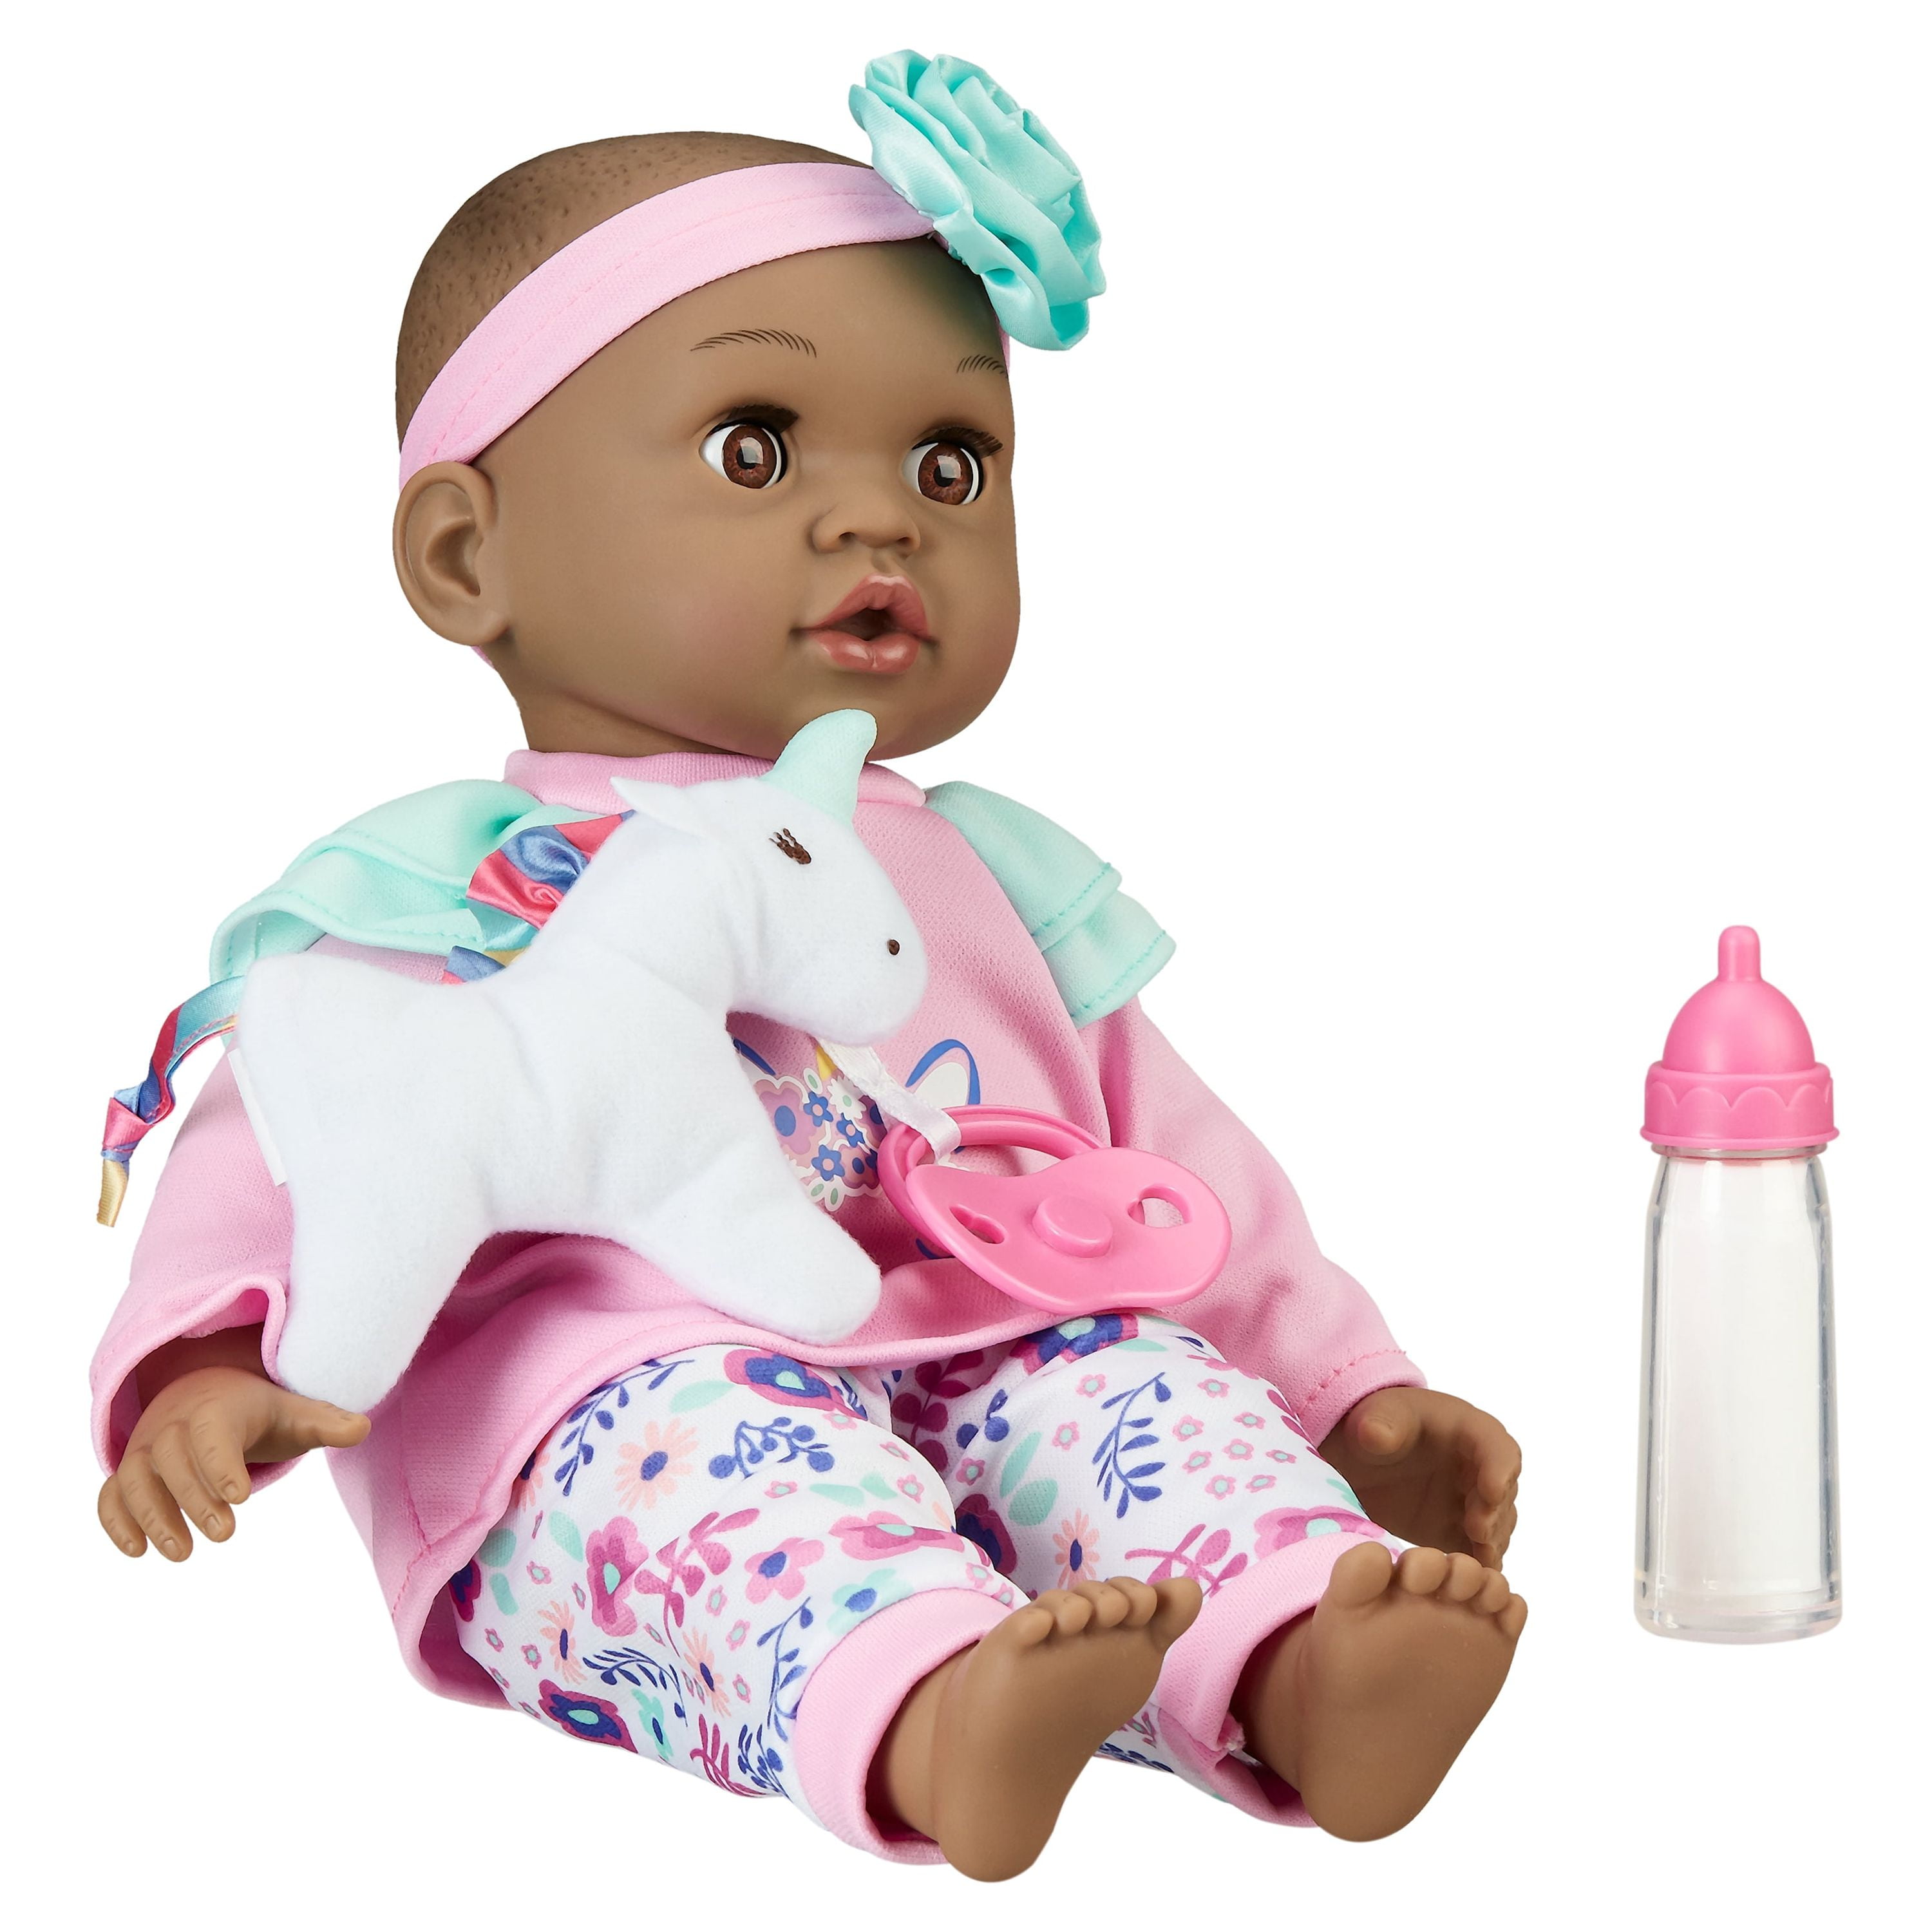 My Sweet Love 8-Inch Mini Soft Baby Doll, African American